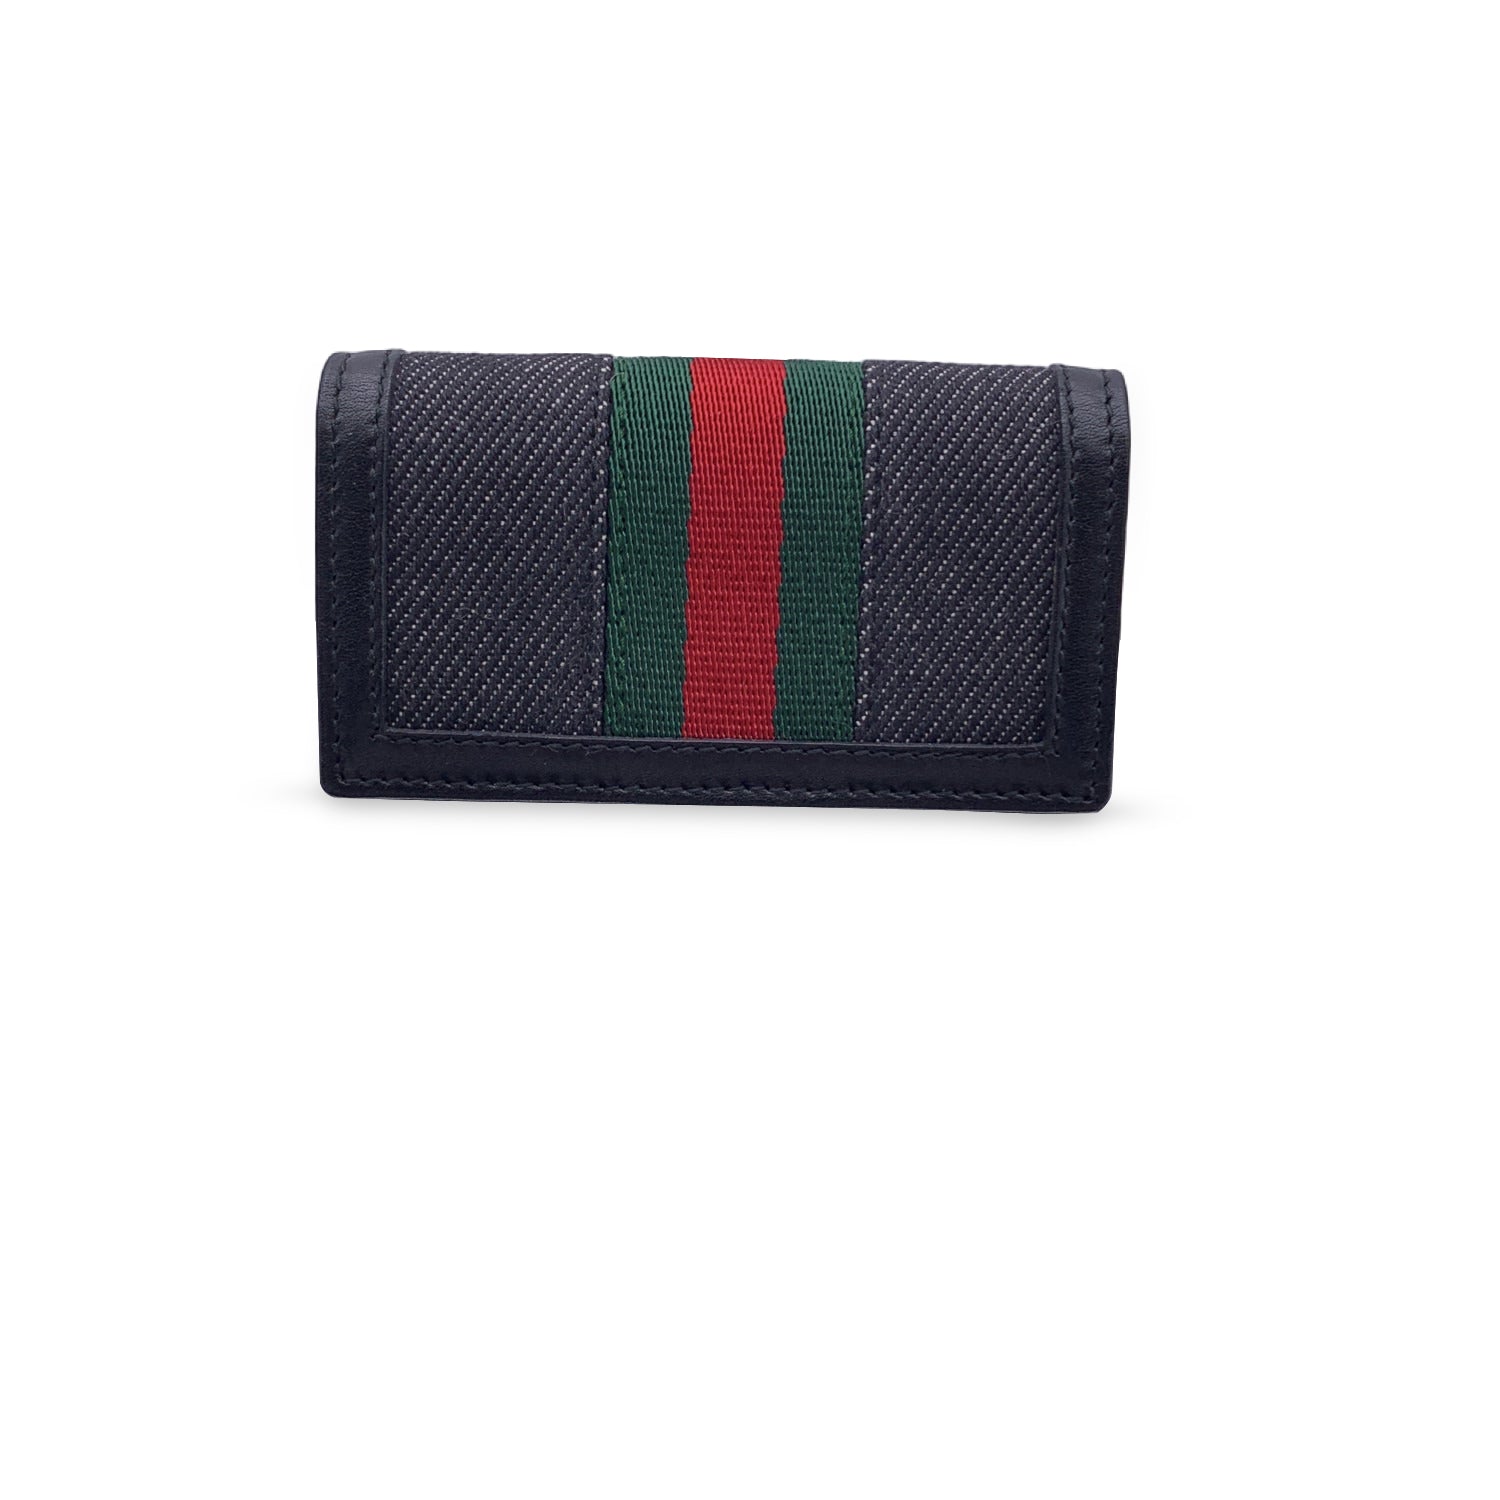 GUCCI Other Accessories